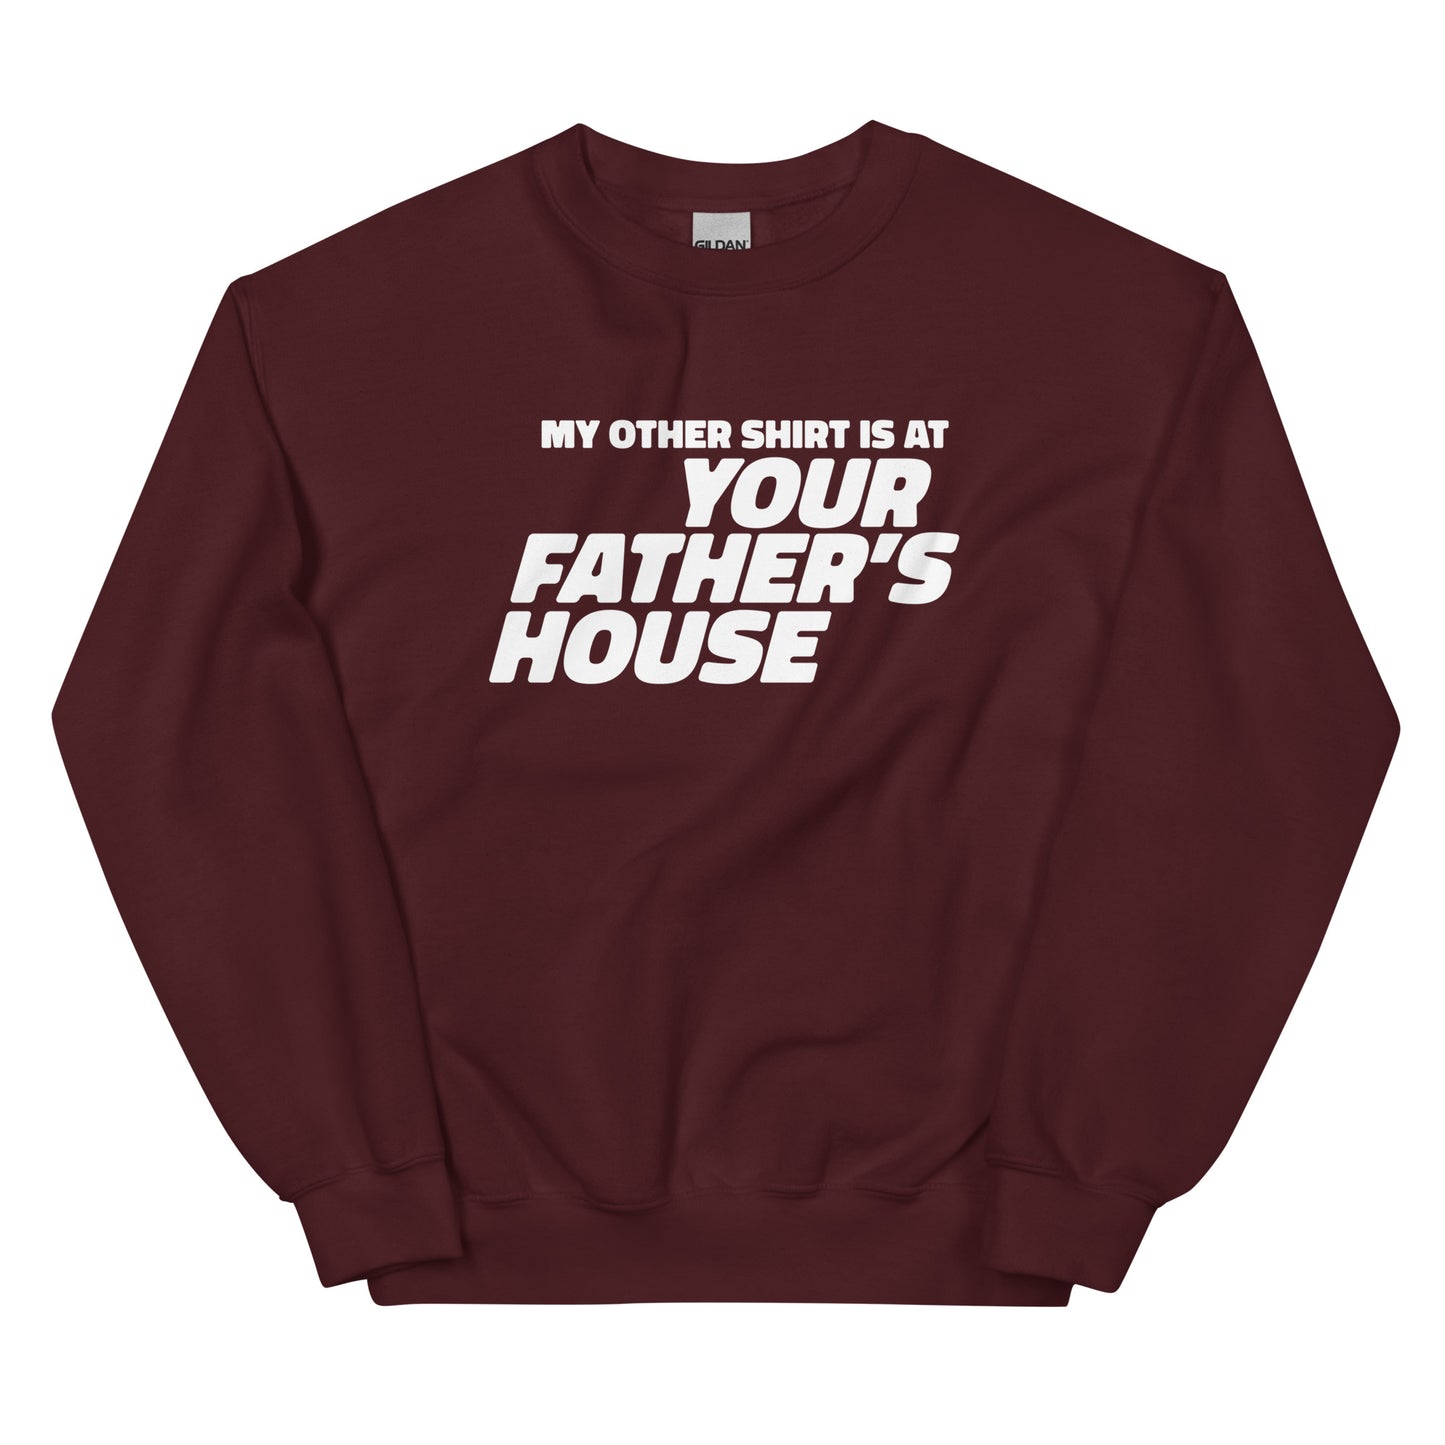 My Other Shirt is at Your Father's House Unisex Sweatshirt